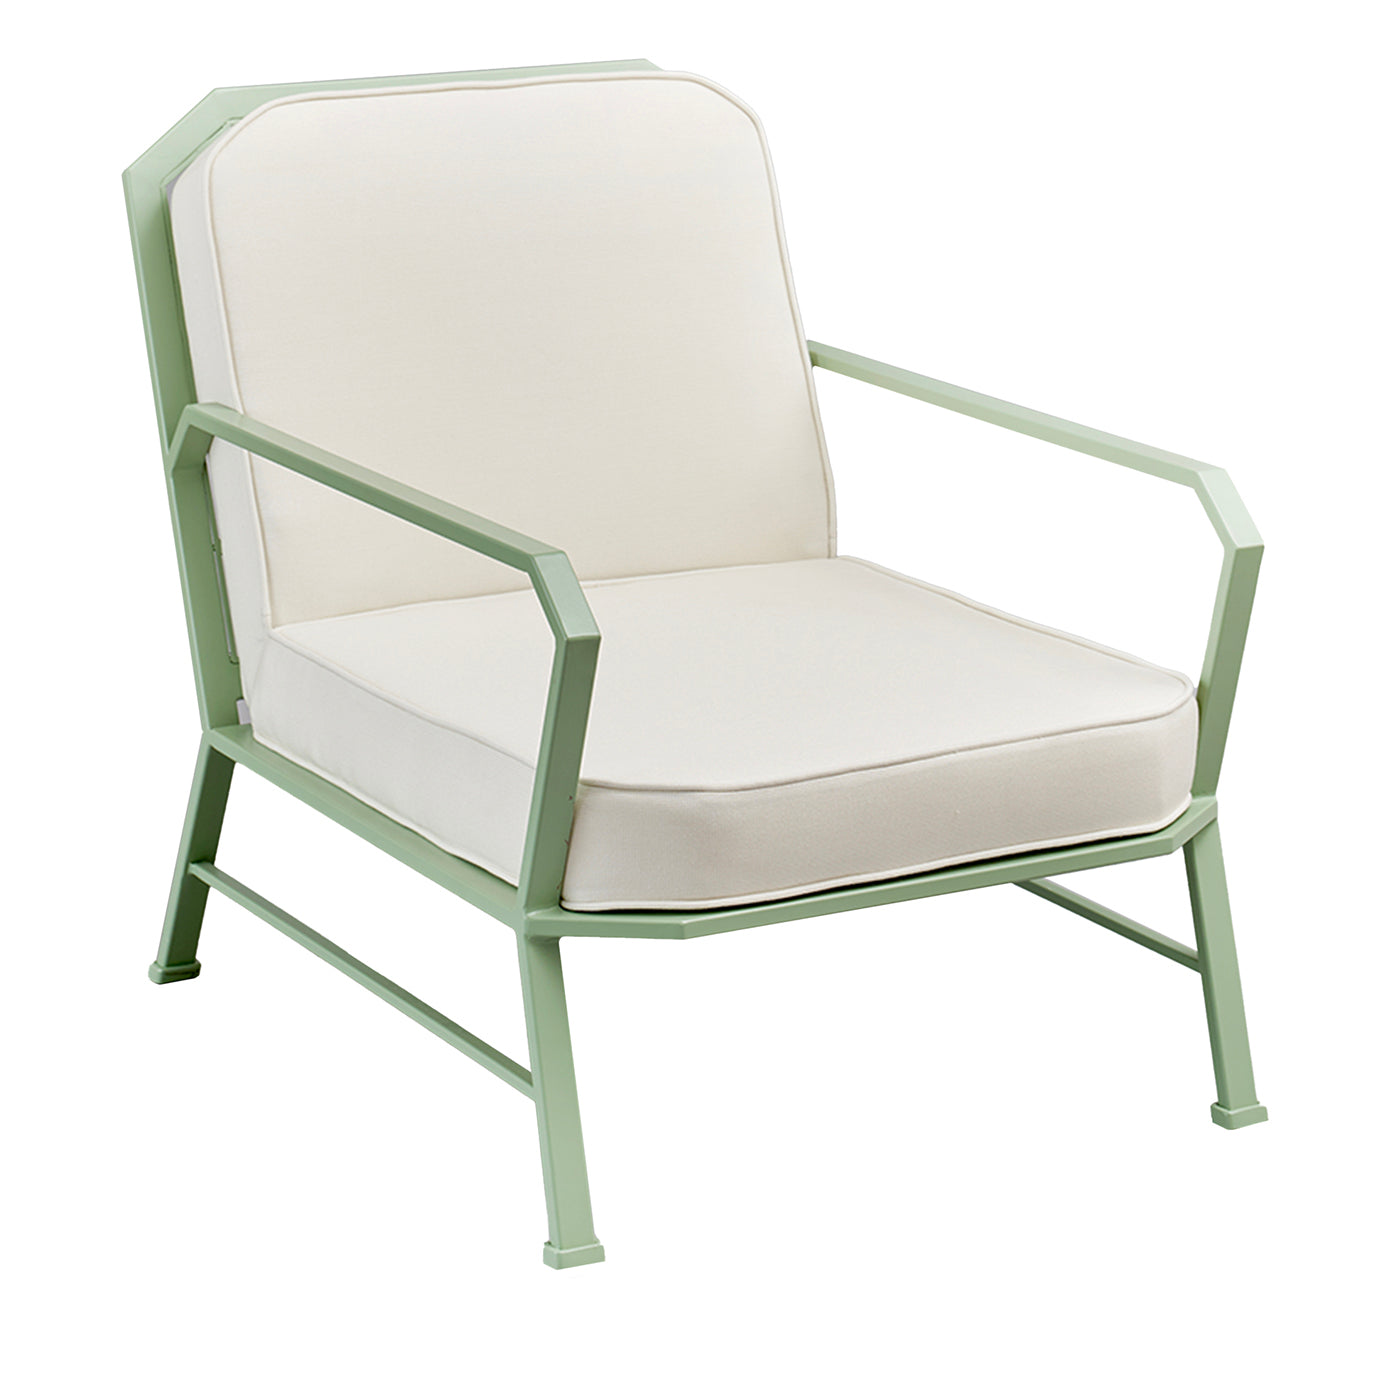 Forest Green and White Armchair by Officina Ciani in Stainless Steel - Main view